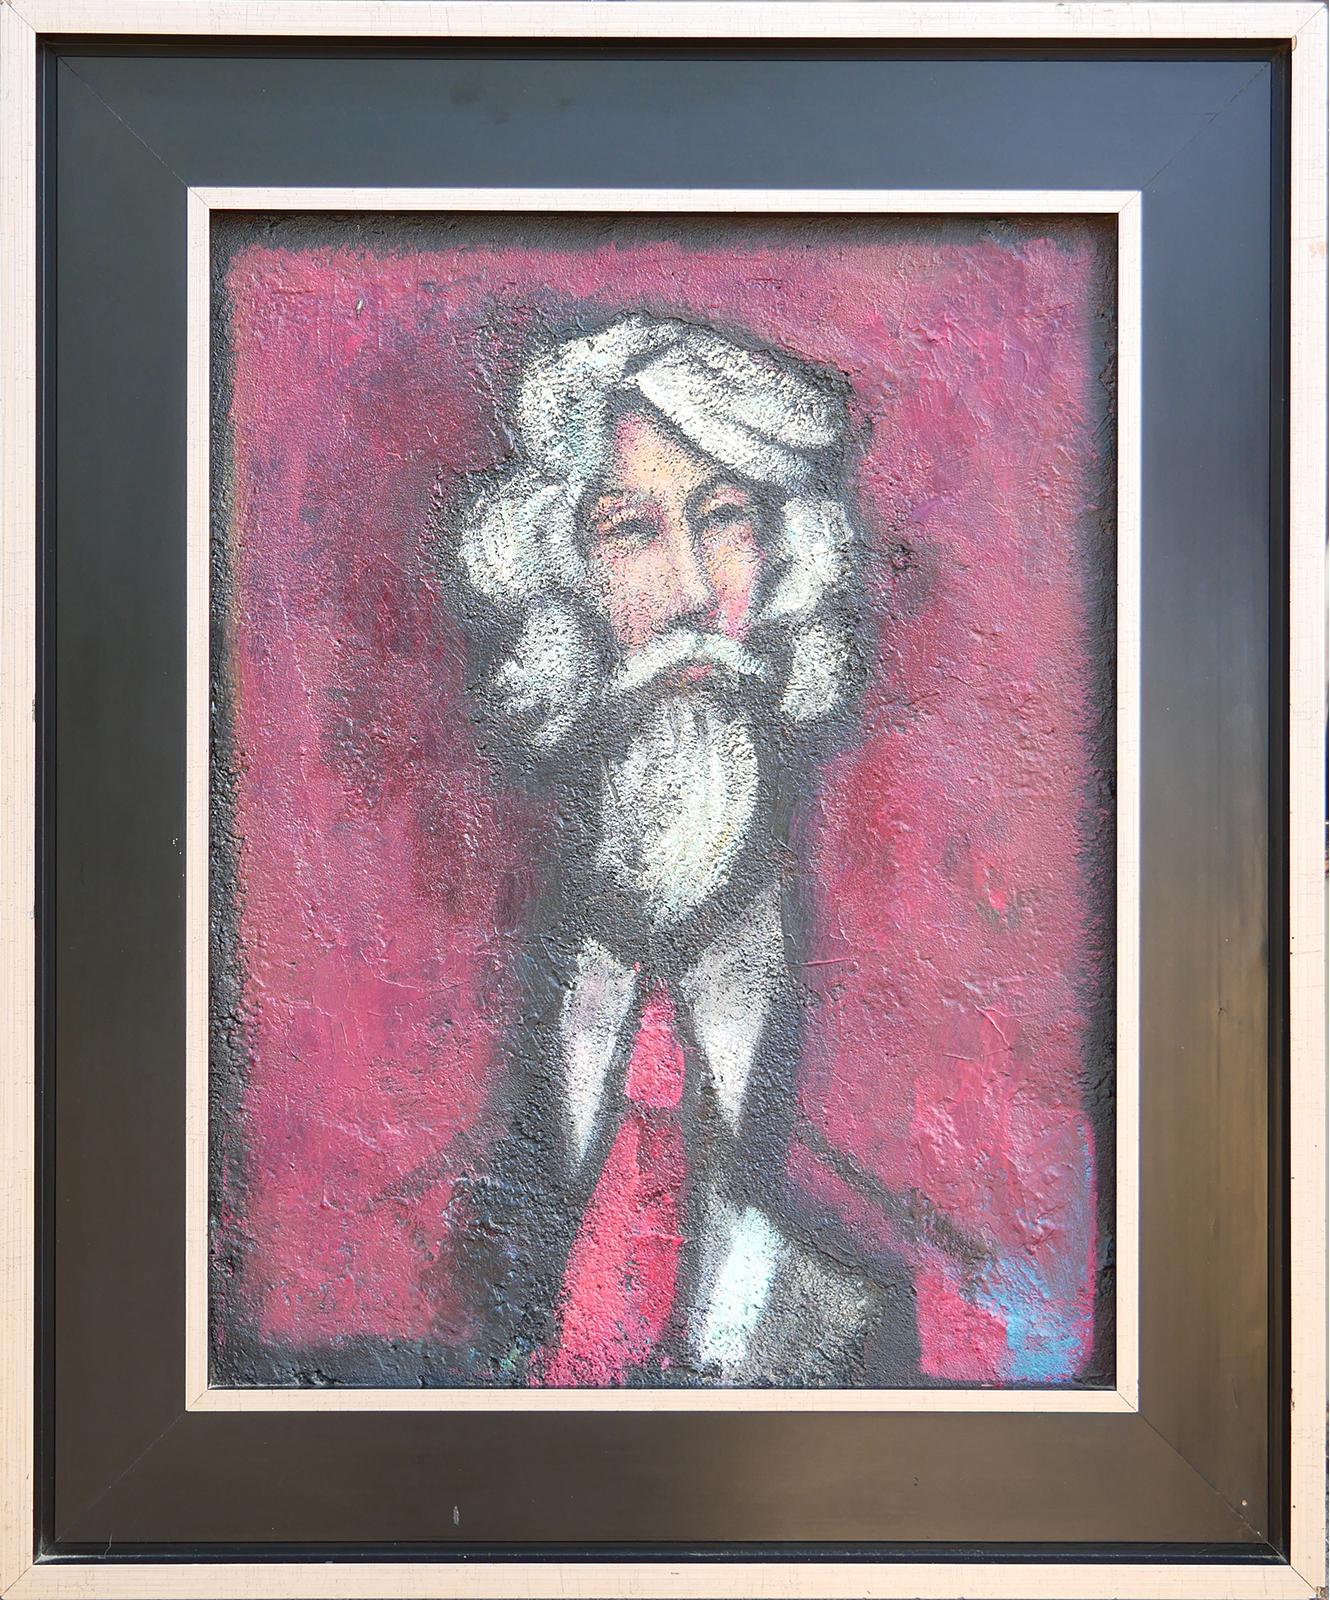 Modern abstract figurative portrait painting by Houston, TX artist David Adickes. The work features a central bearded male figure set against a red background. Currently hung a decorative black frame.

Dimensions Without Frame: H 17.5 in. x W 13.5